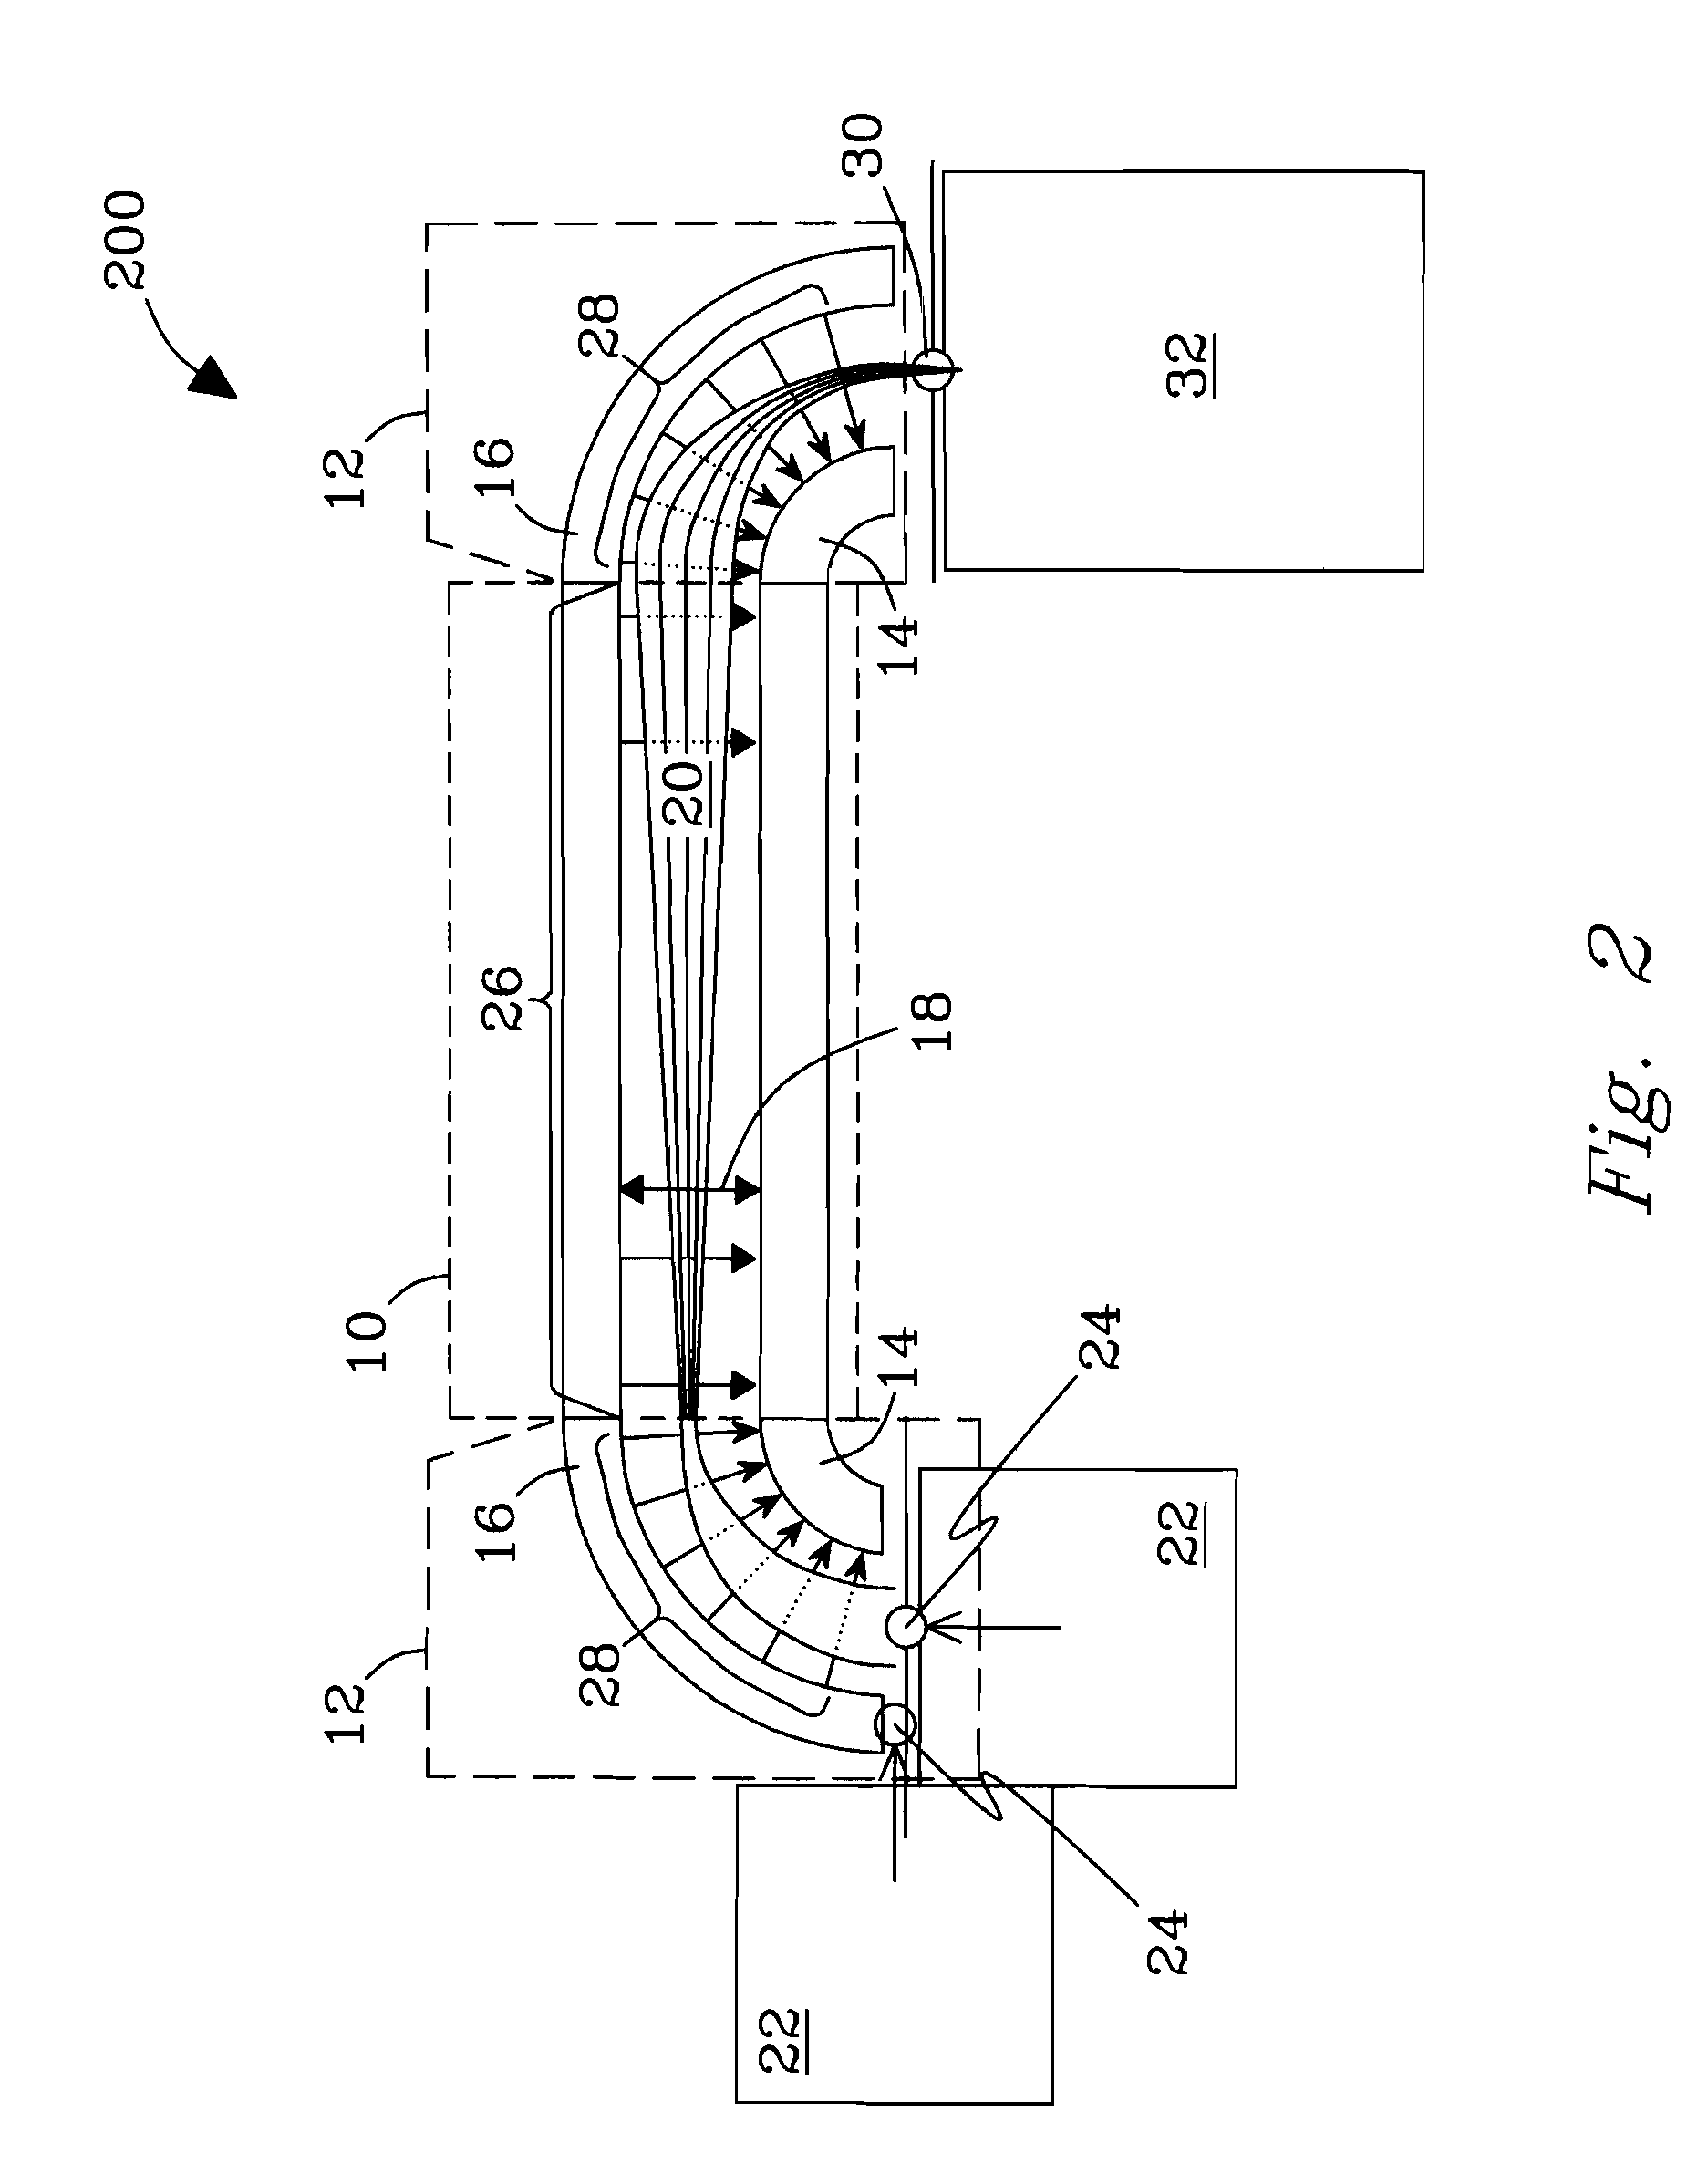 Hooked differential mobility spectrometry apparatus and method therefore